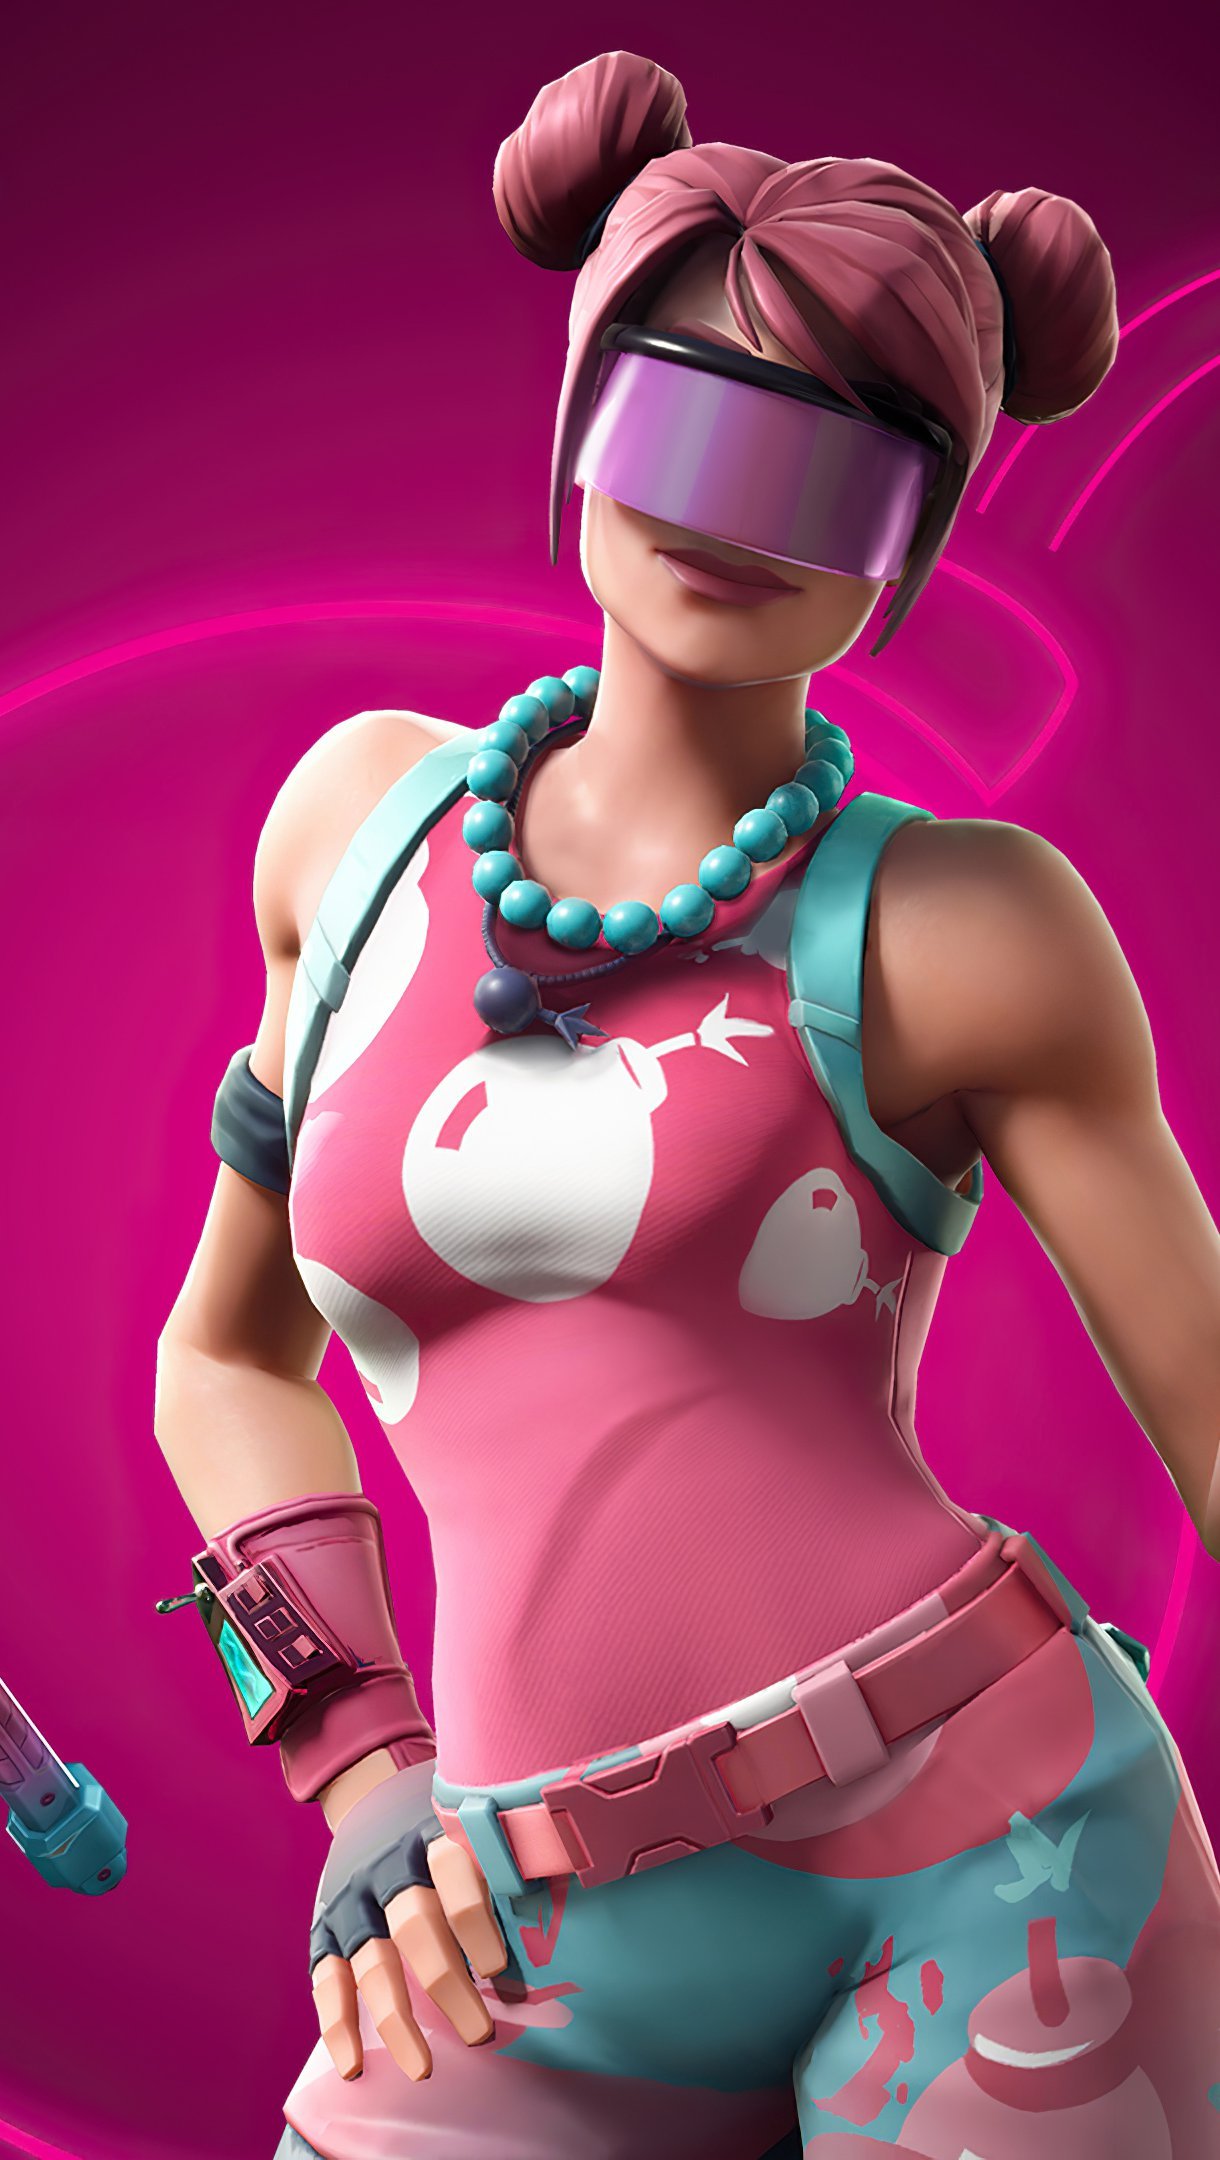 Wallpaper Fortnite Candy Commando Bubble bomber outfit Vertical